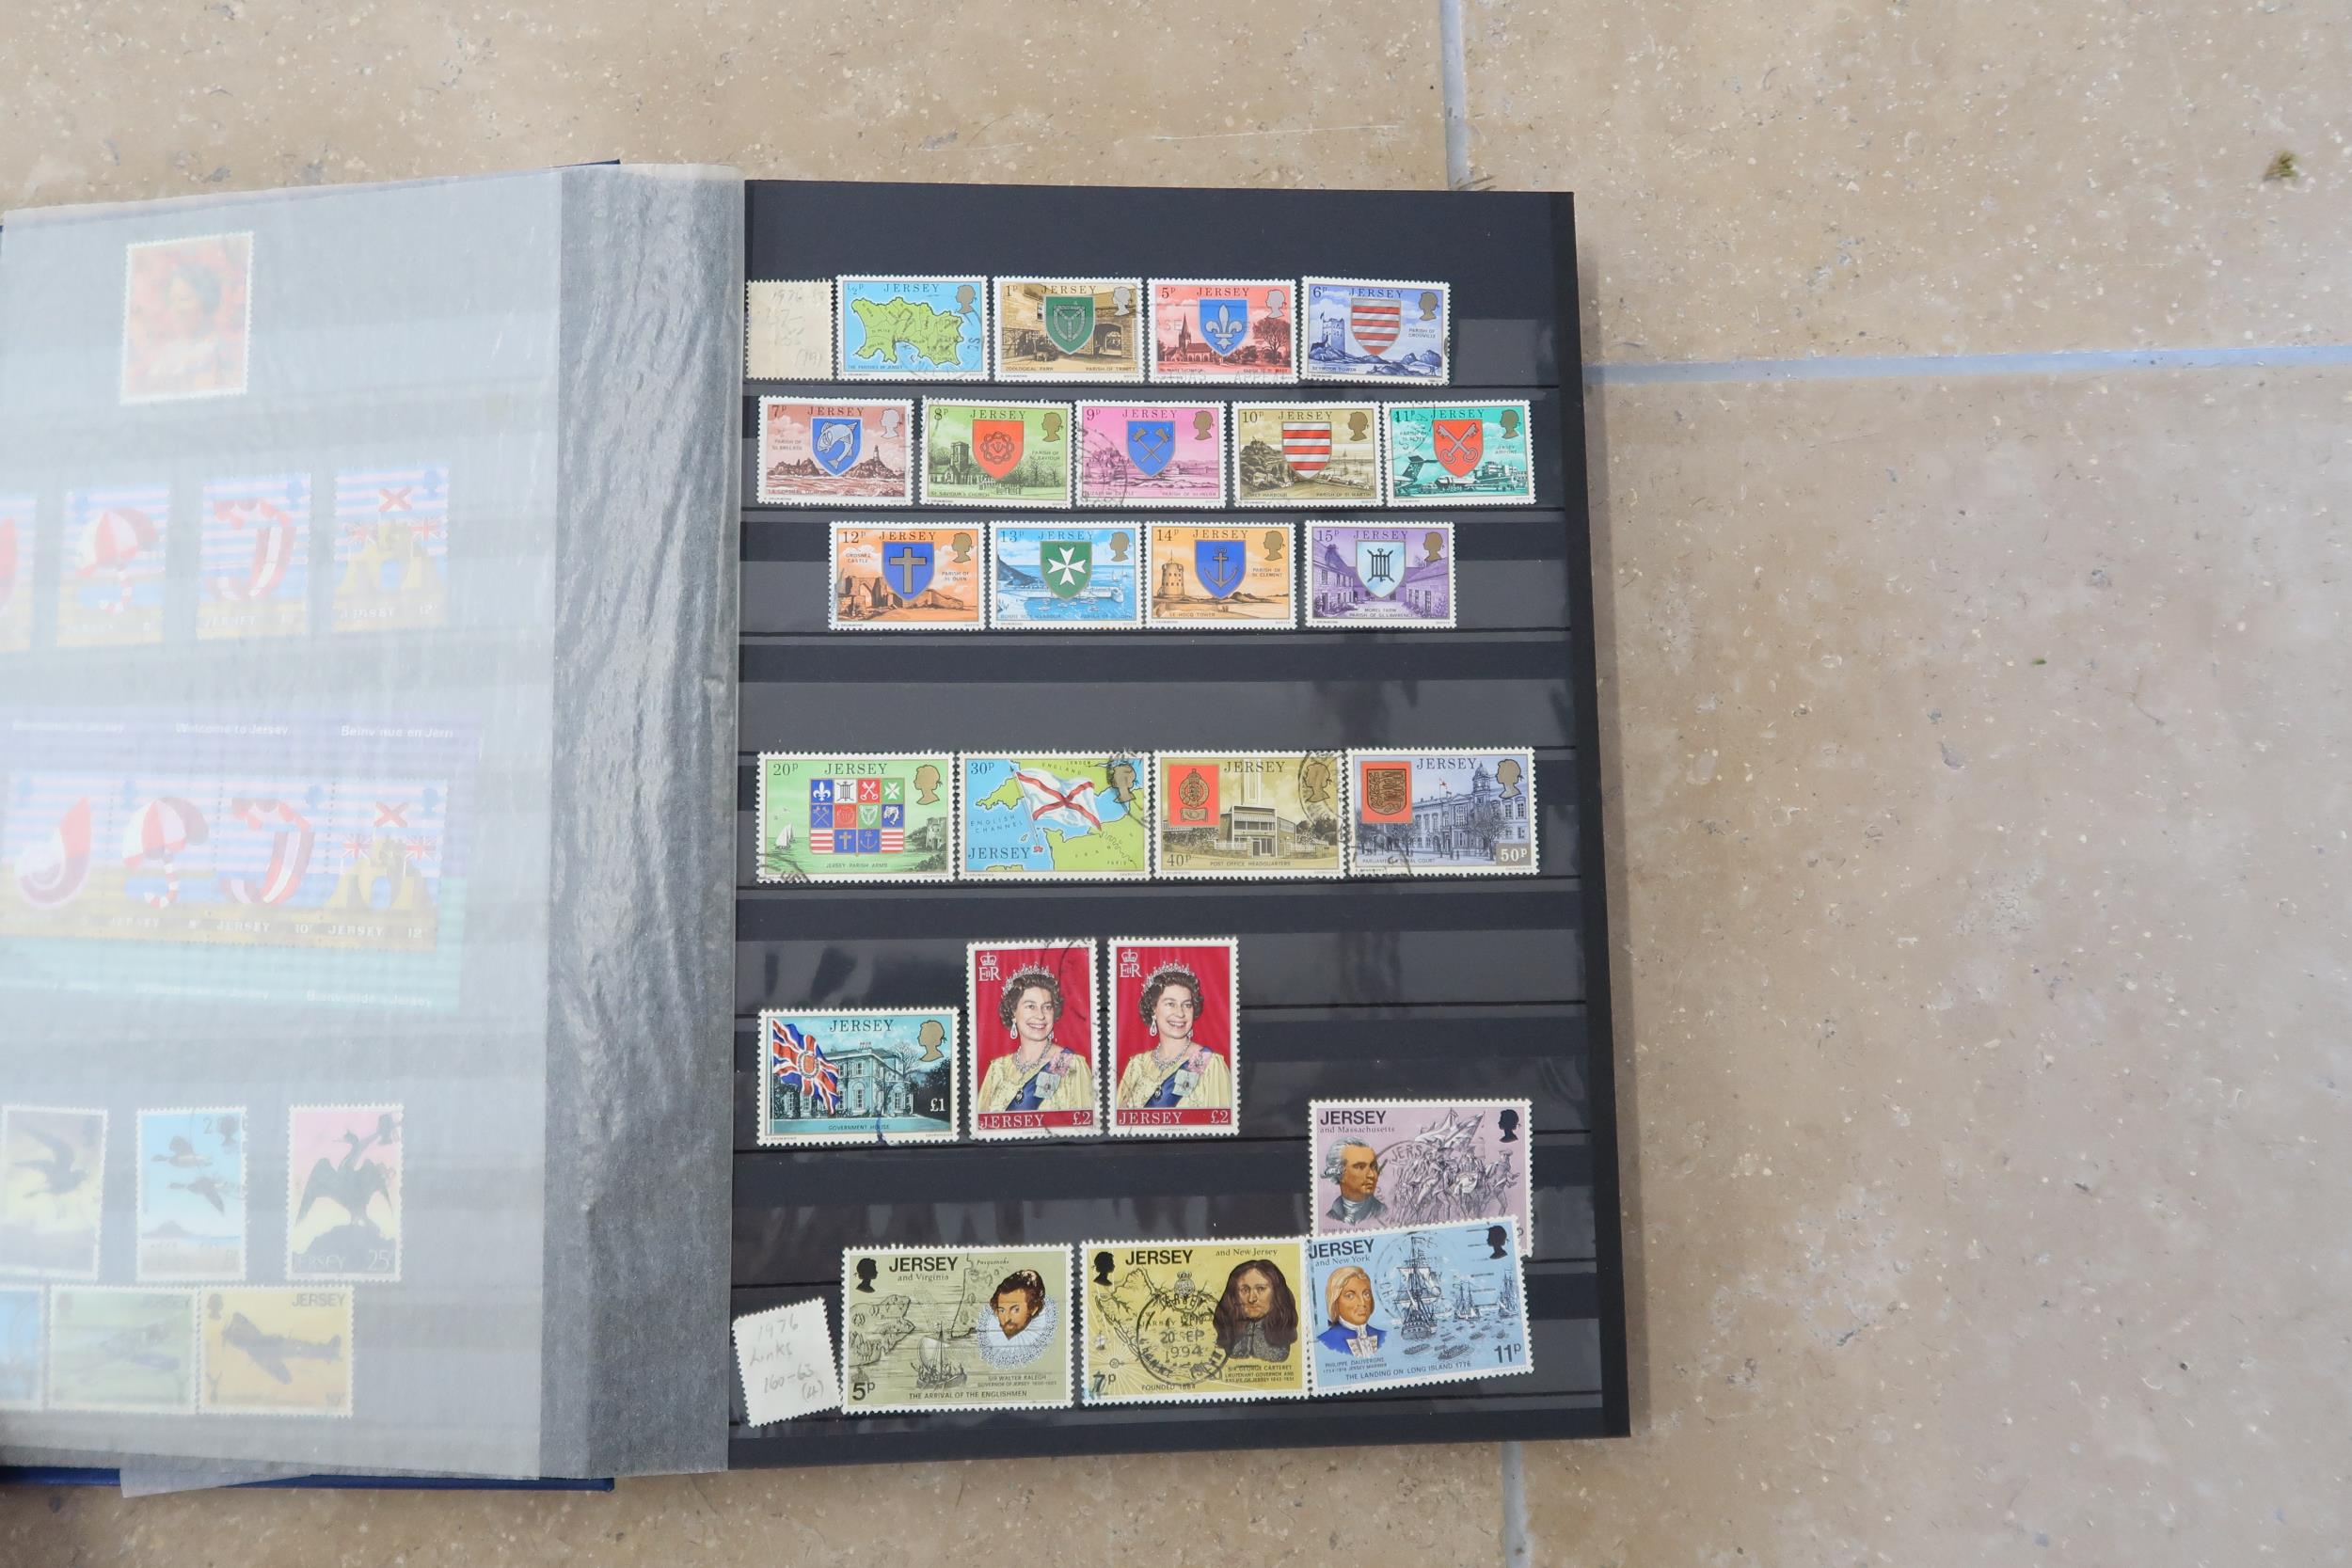 Five stamp albums including Jersey circa 1990's, Guernsey and Alderney, Great Britain circa 1990s, - Image 3 of 5